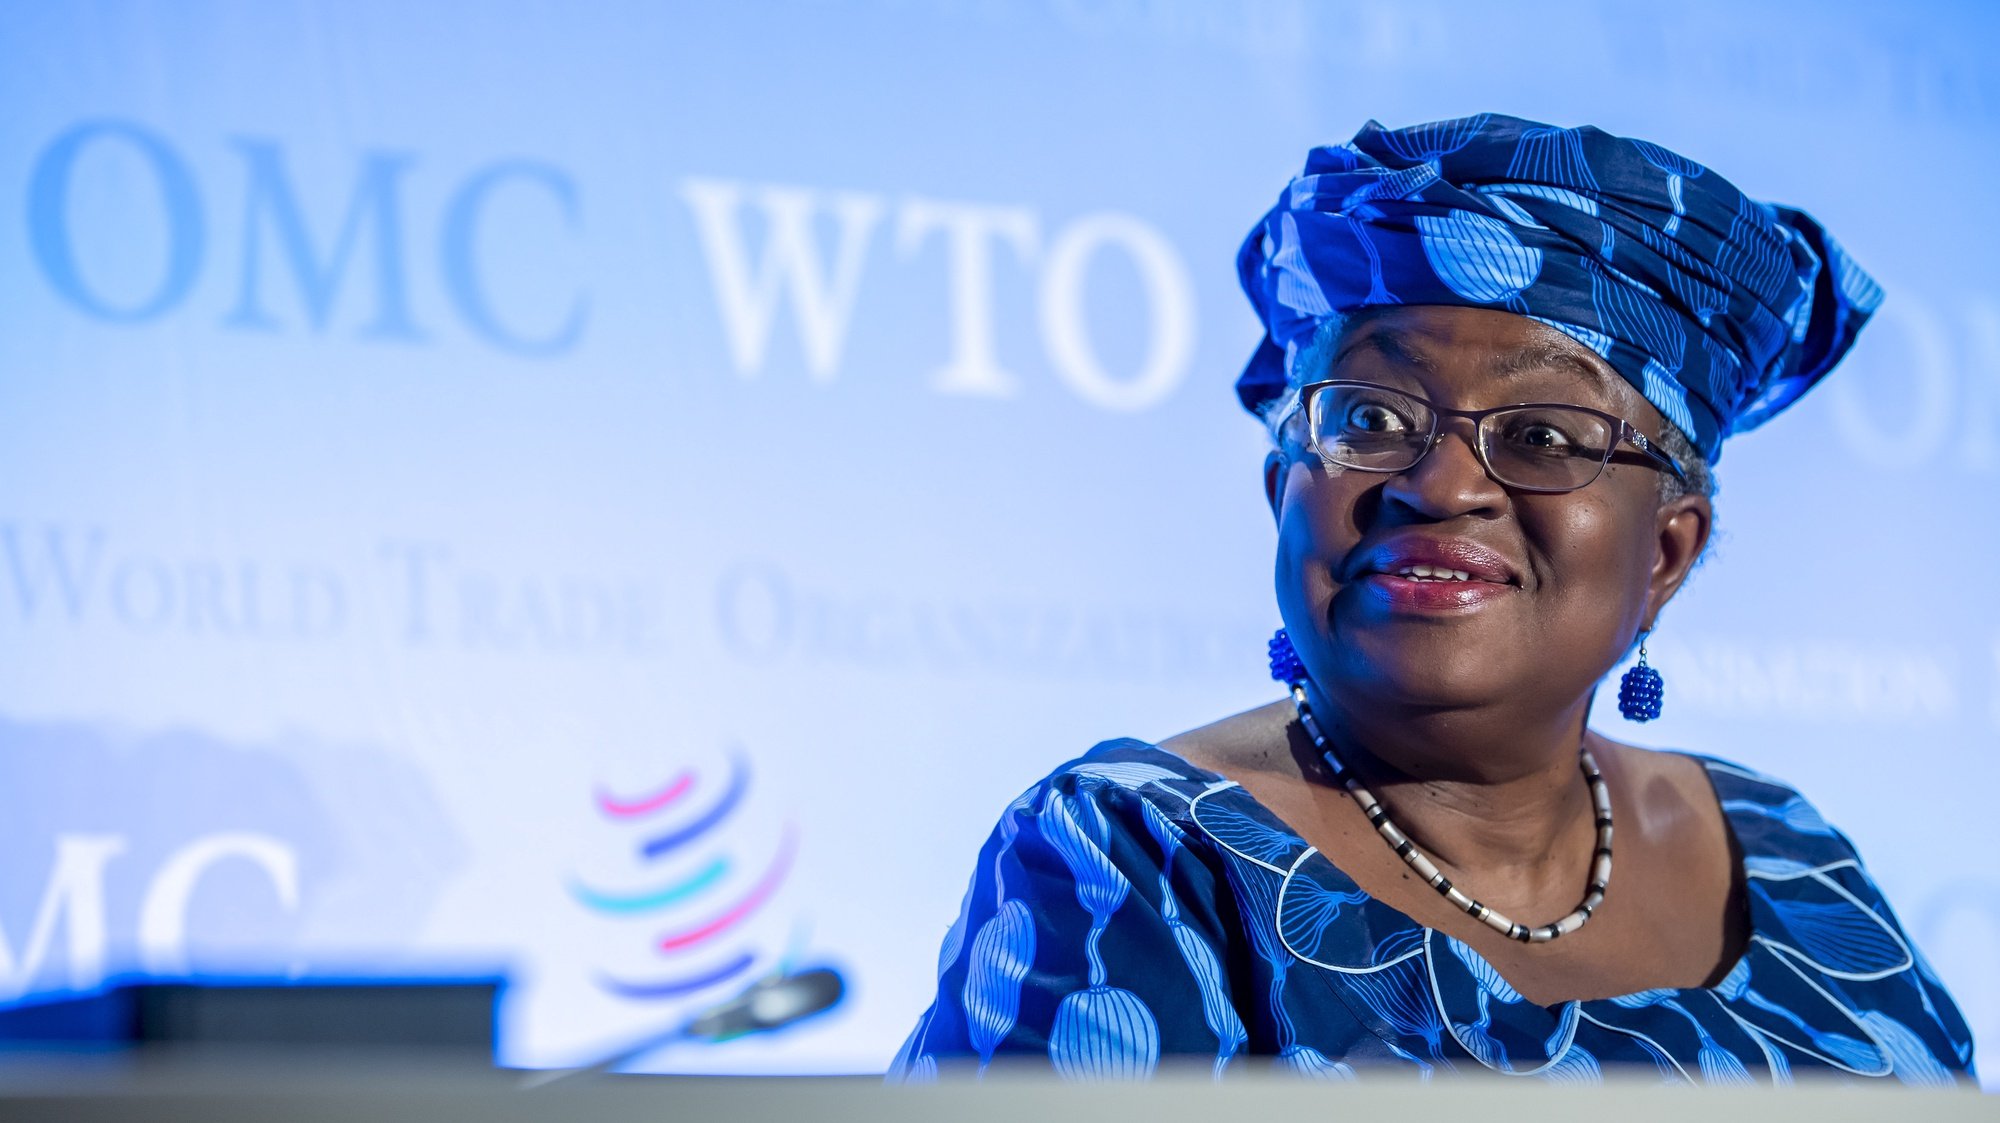 epa08547703 Ngozi Okonjo-Iweala, from Nigeria, candidate as Director General of the World Trade Organization (WTO), speaks during the press conferences of candidates for the WTO Director-General selection process, at the headquarters of the World Trade Organization (WTO), in Geneva, Switzerland, 15 July 2020.  EPA/MARTIAL TREZZINI